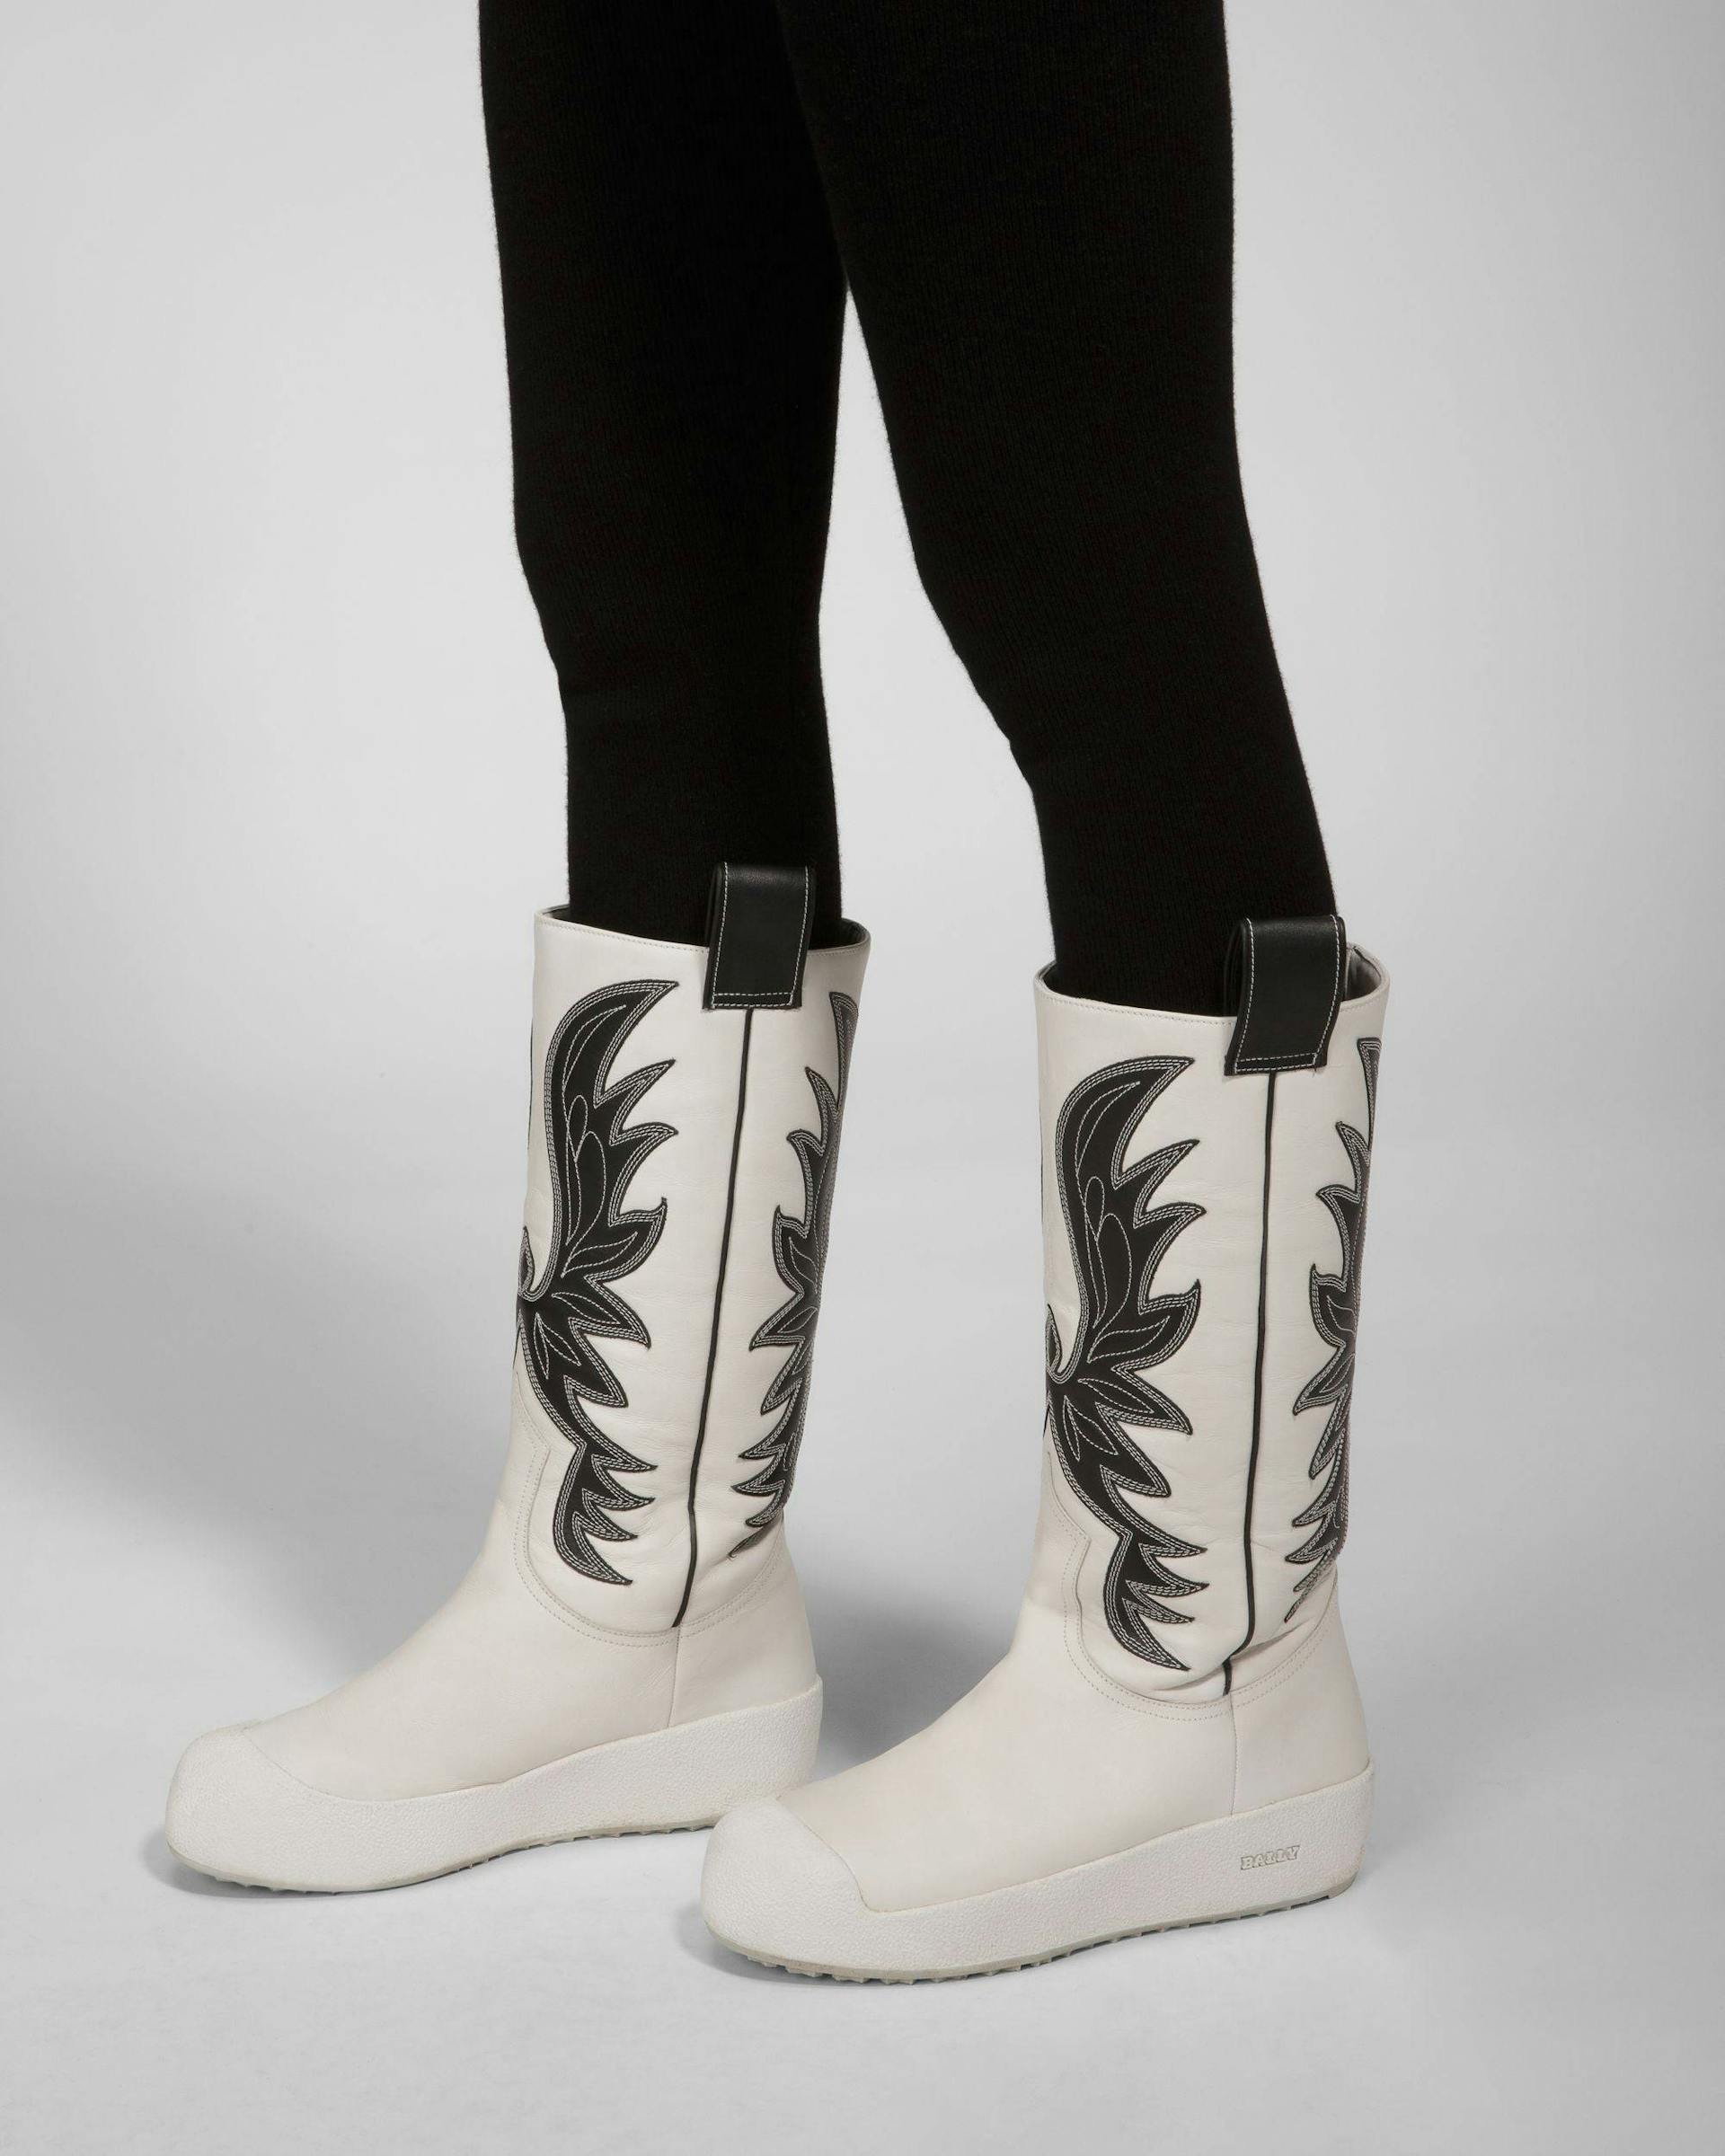 Chambery Leather Long Boots In White & Black - Women's - Bally - 03